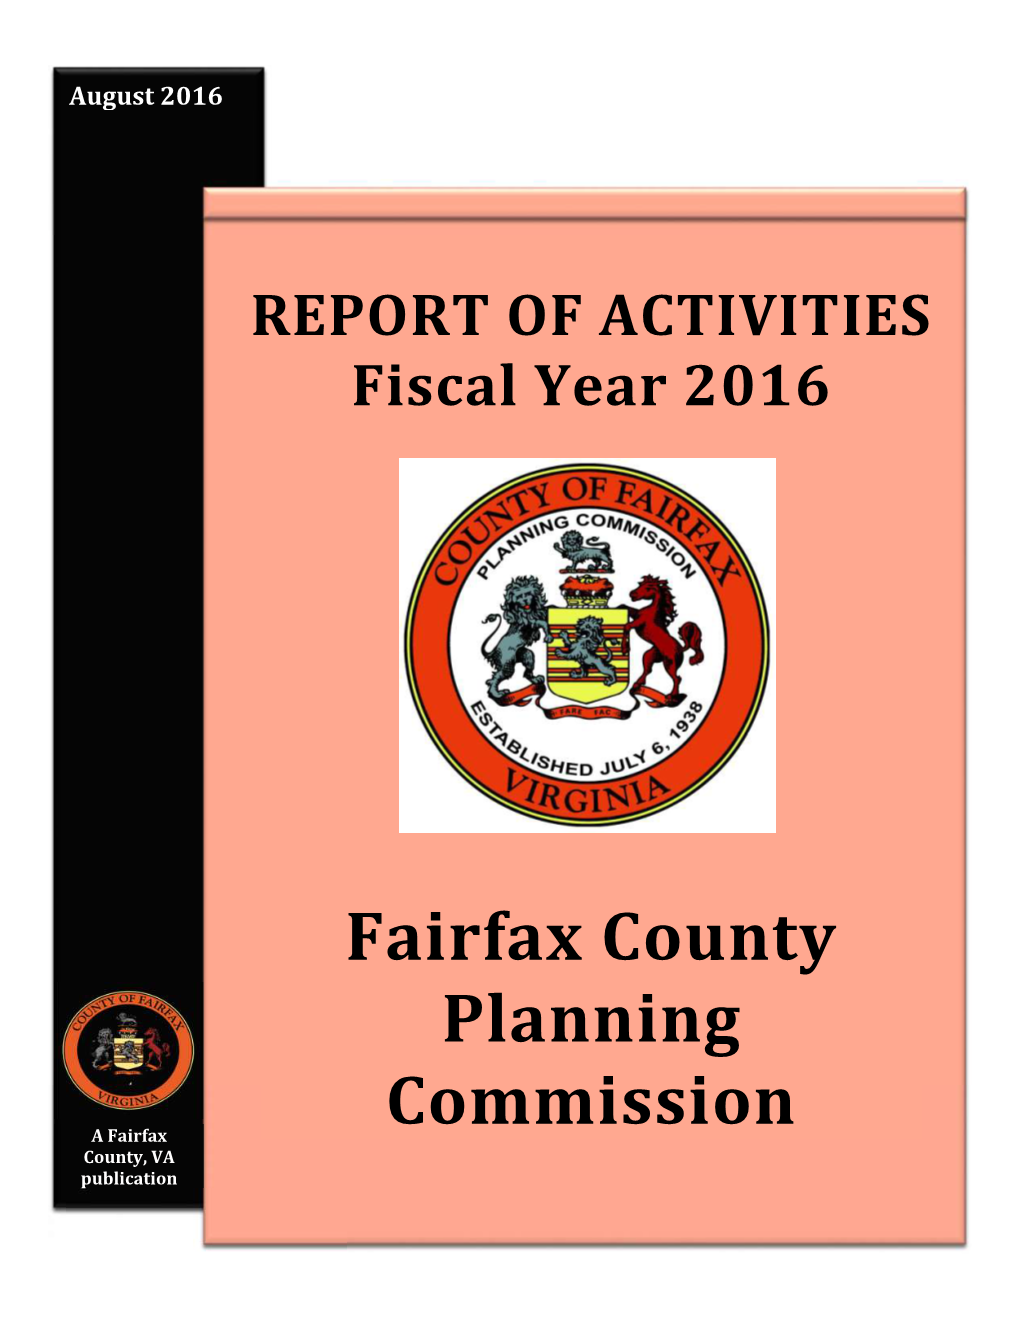 Fairfax County Planning Commission